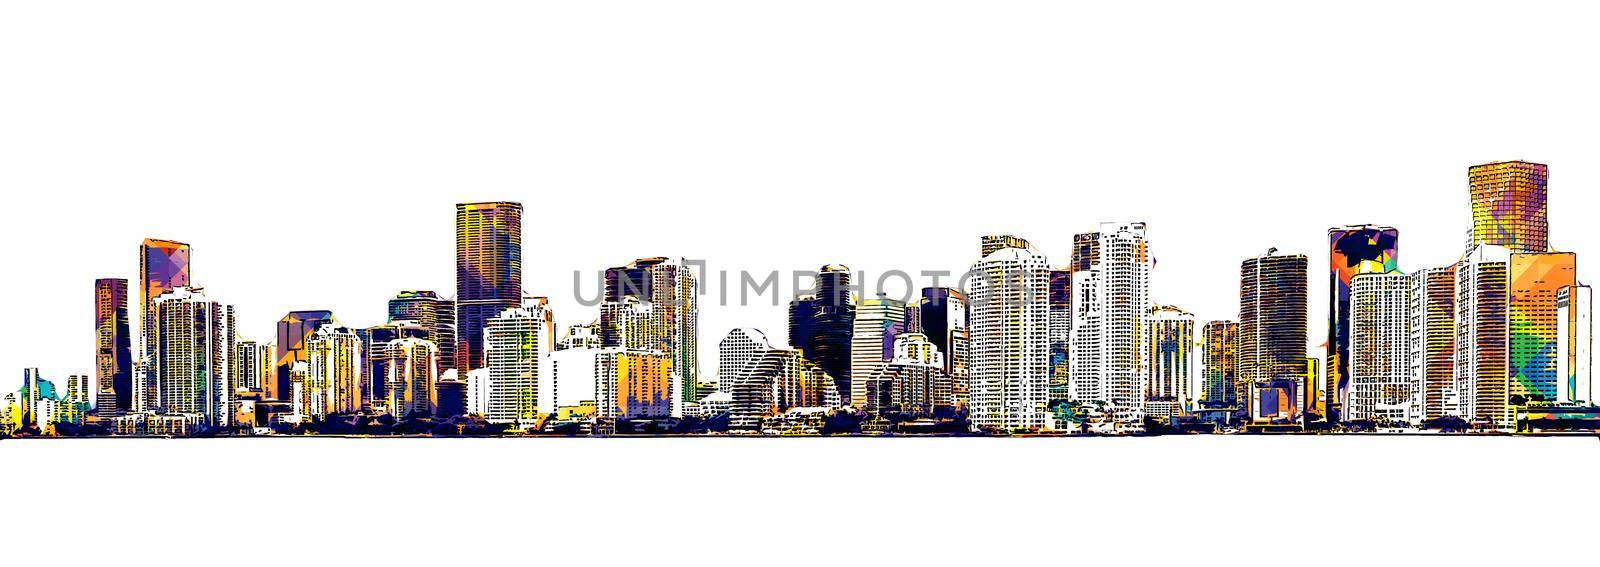 Pop art drawing of Miami Downtown skyline on white background by Mariakray